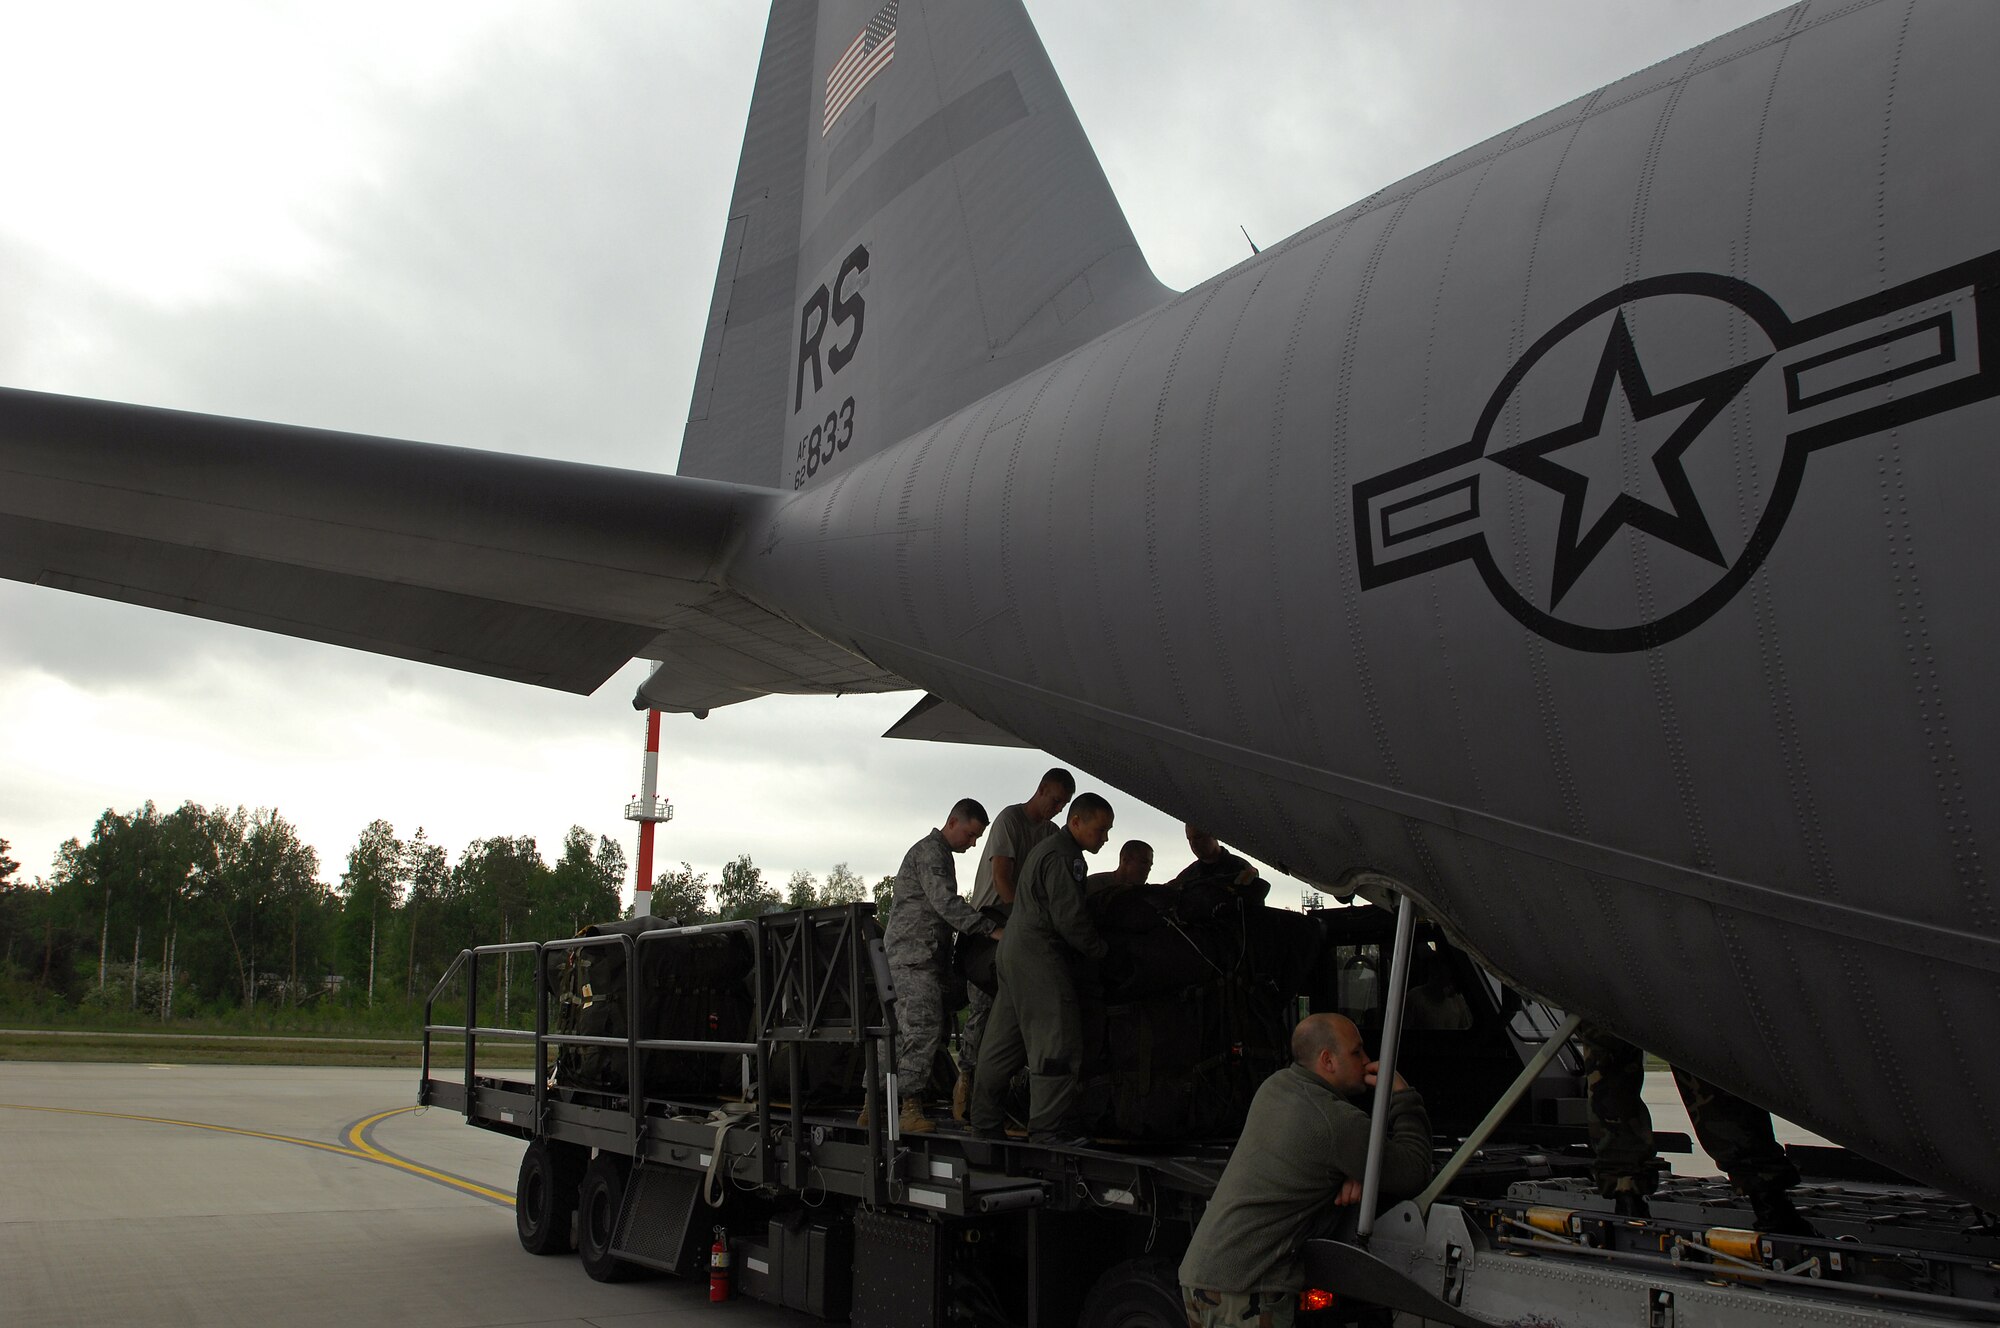 United States Air Force members with the 1st Combat Communication Squadron and 37th Airlift Squadron prepare to load life saving equipment onto a Ramstein C-130 Hercules, May 9, 2009, in support of NASA, in its launch of the space shuttle Atlantis scheduled for May 11, 2009. (U.S. Air Force photo by Senior Airman Kenny Holston)